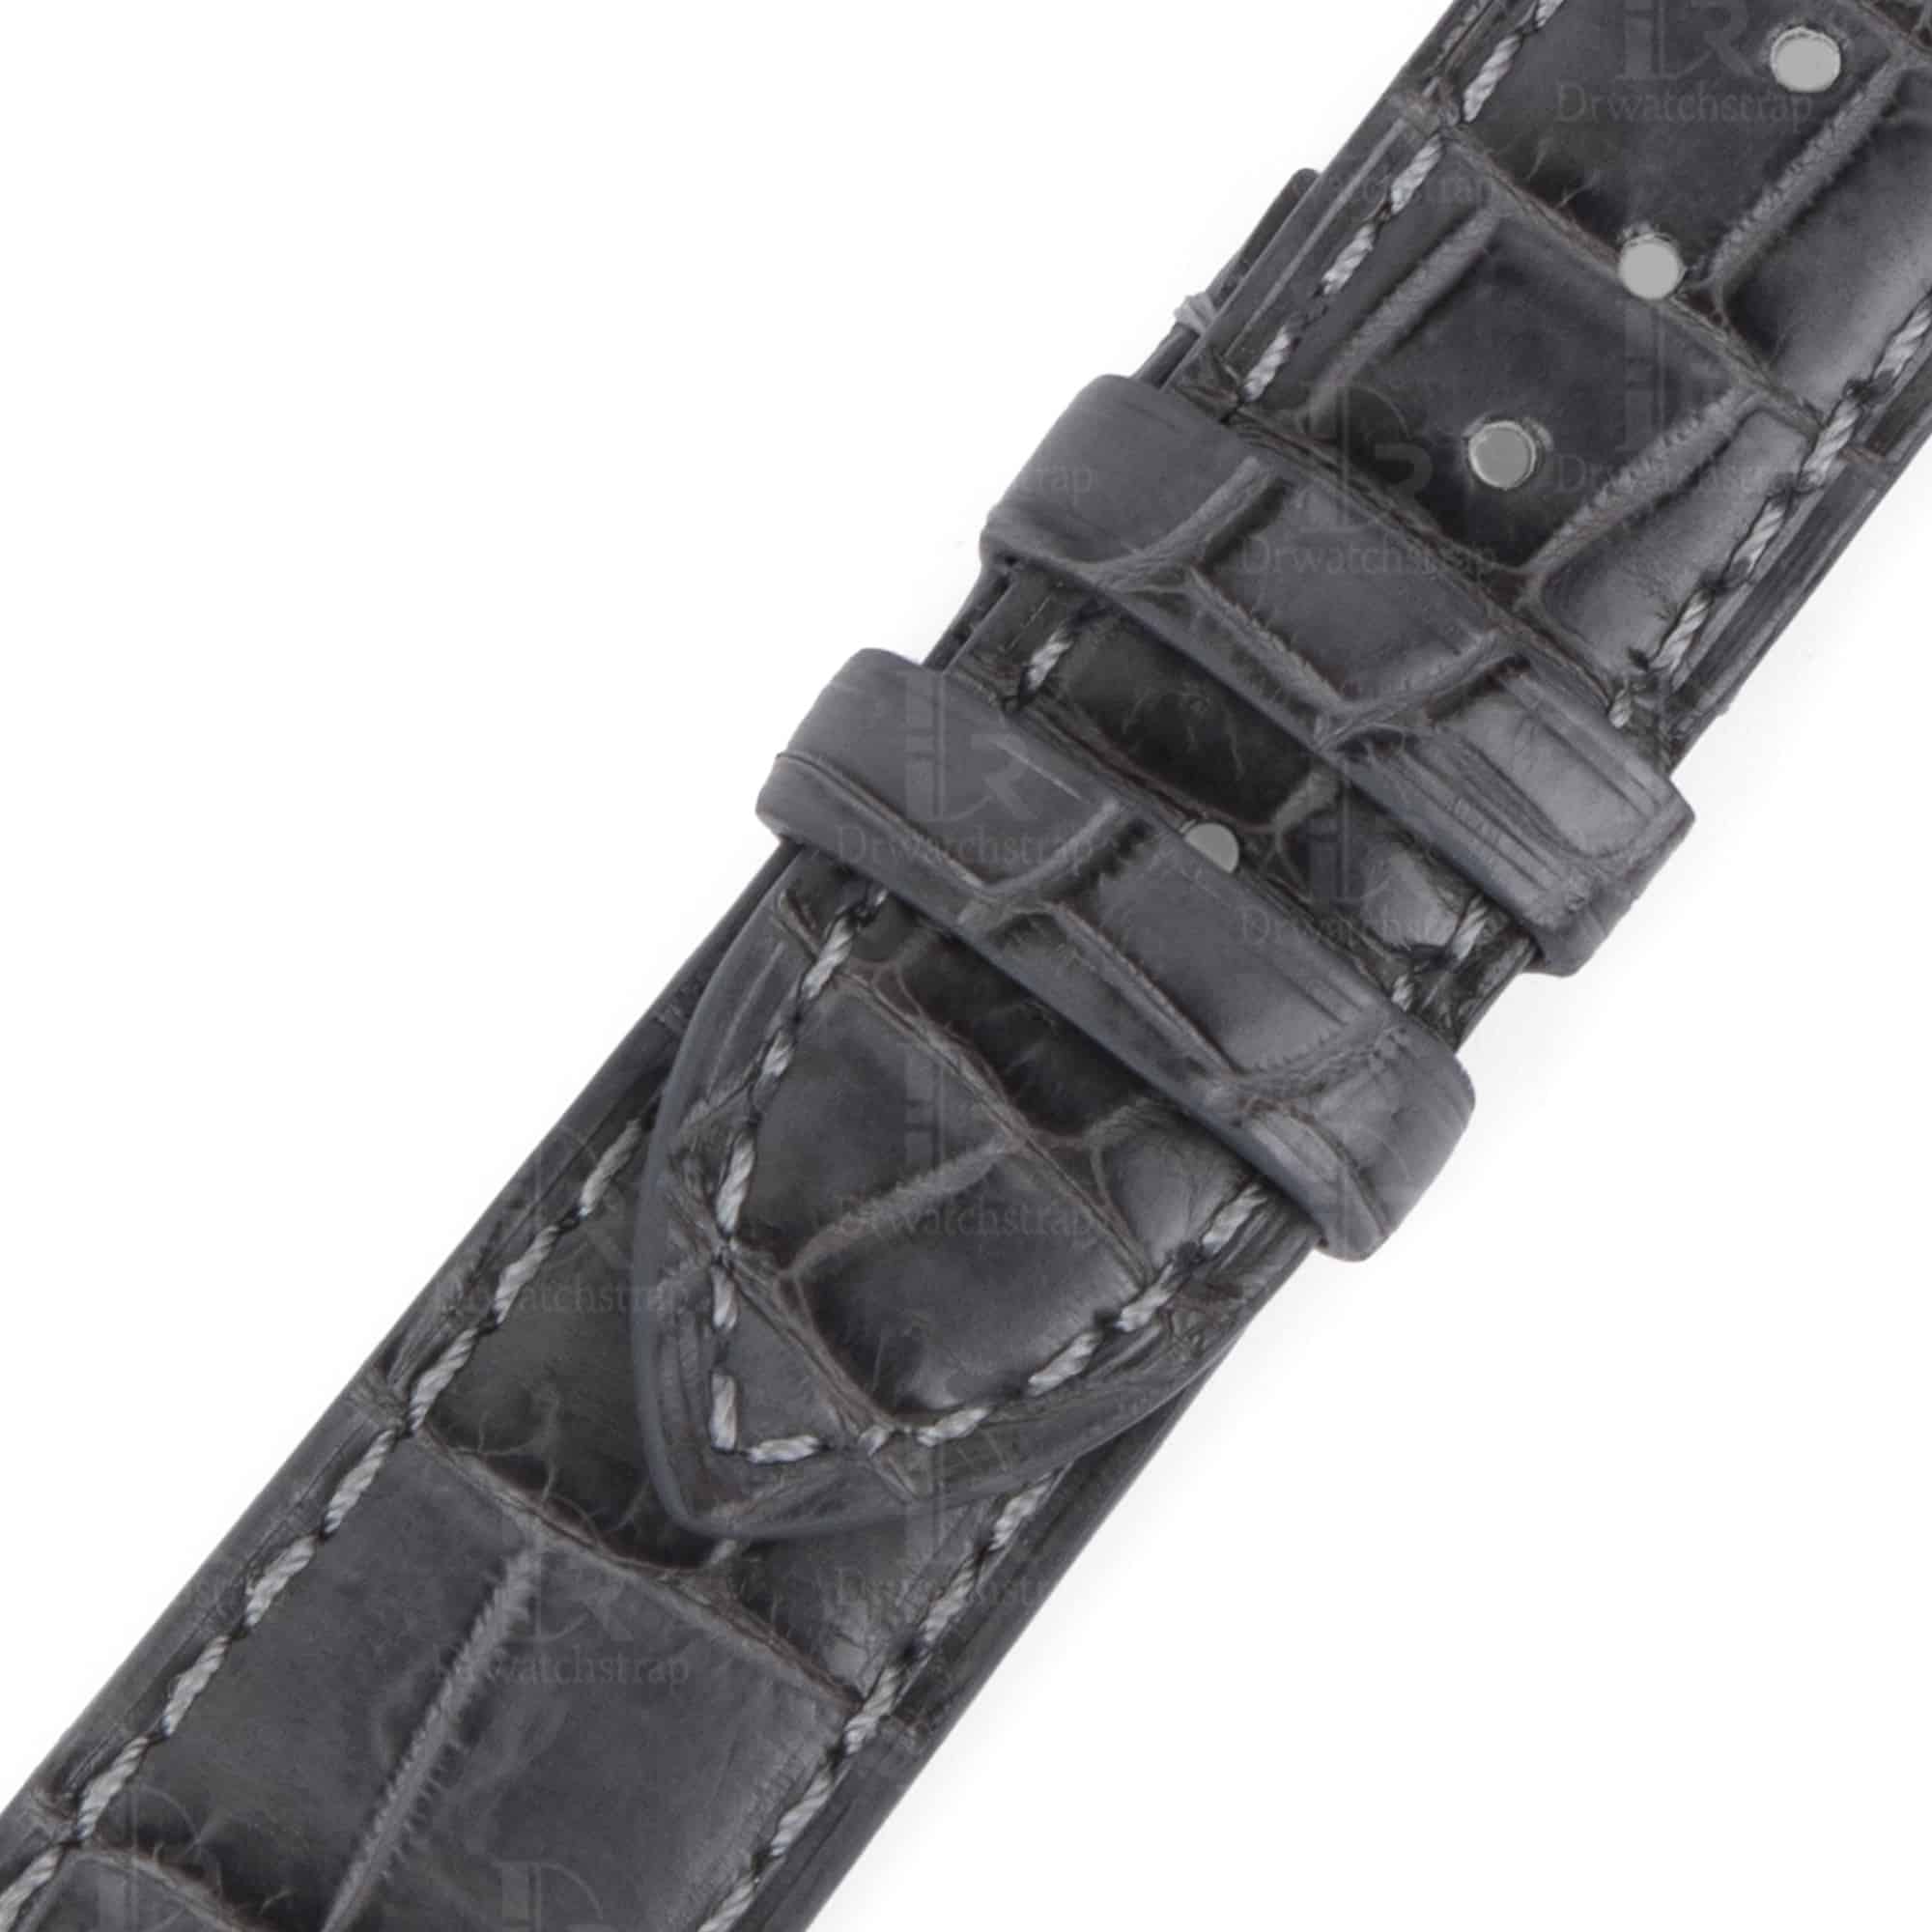 Rado watch band replacement for sale